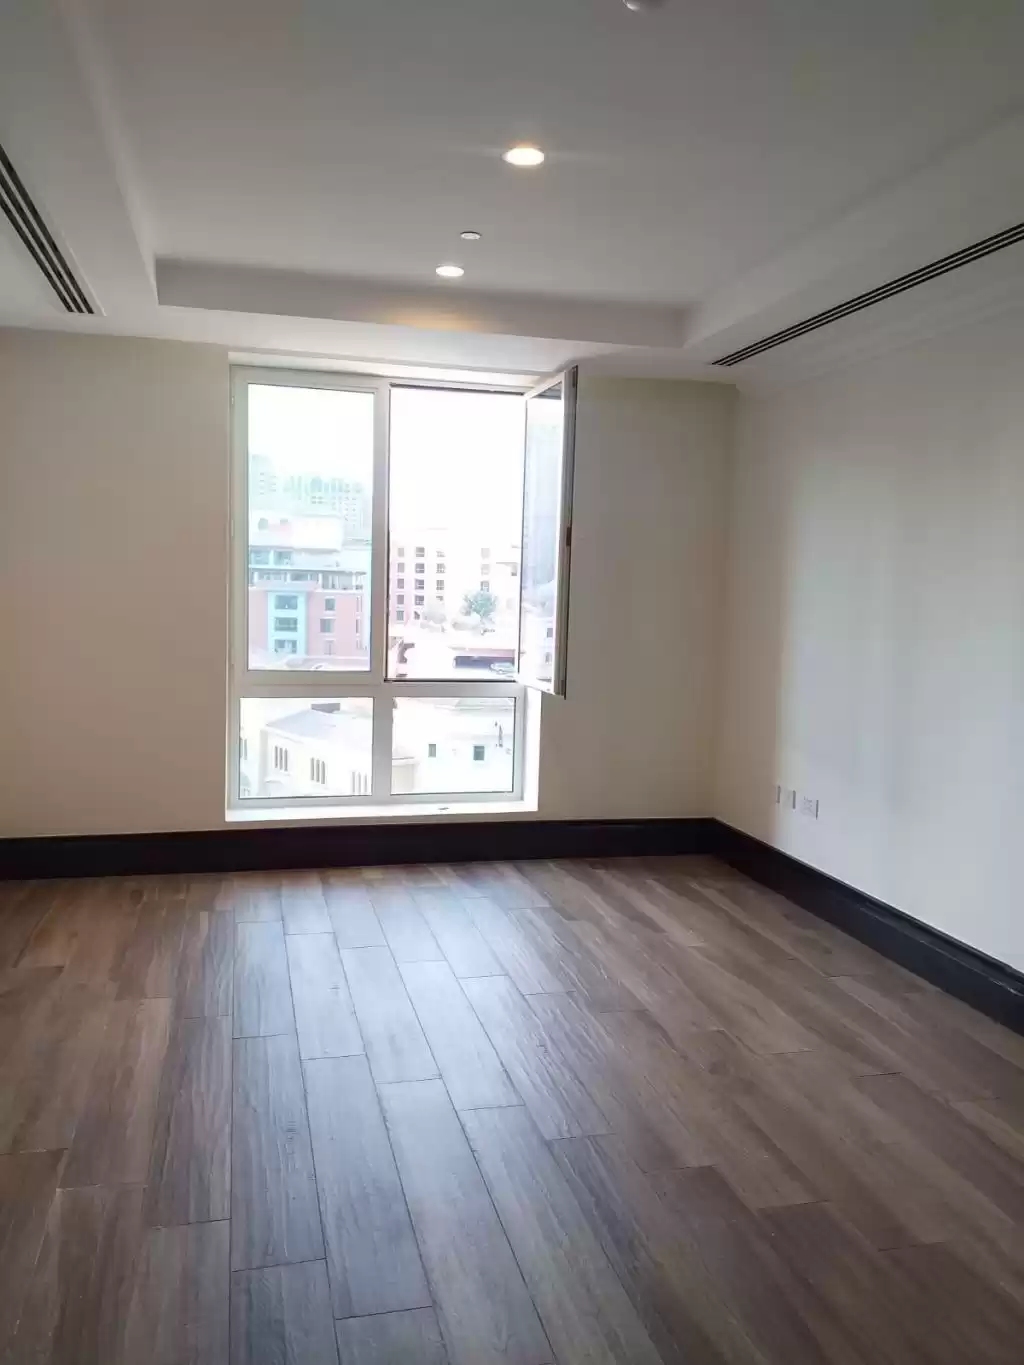 Residential Ready Property 1 Bedroom S/F Apartment  for rent in Al Sadd , Doha #10183 - 1  image 